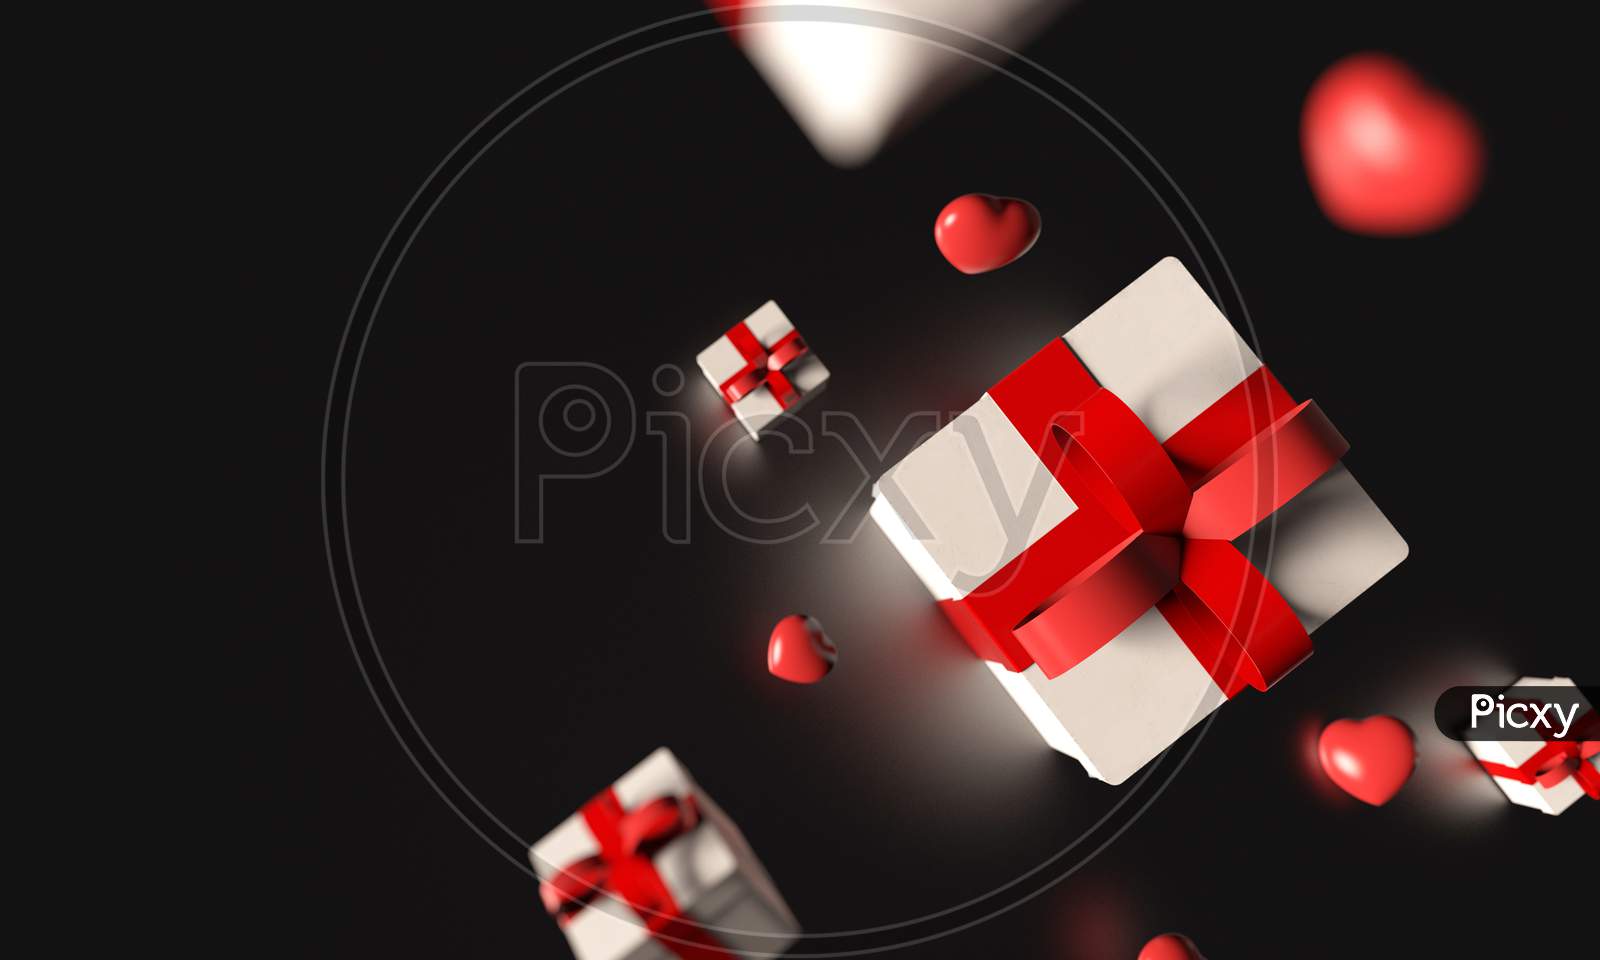 Top View Of White Gift Box With Red Ribbon And Many Heart Falling From Sky On Black Background. Valentine Christmas Holiday And Black Friday Concept. Birthday Celebration Event Banner. 3D Illustration